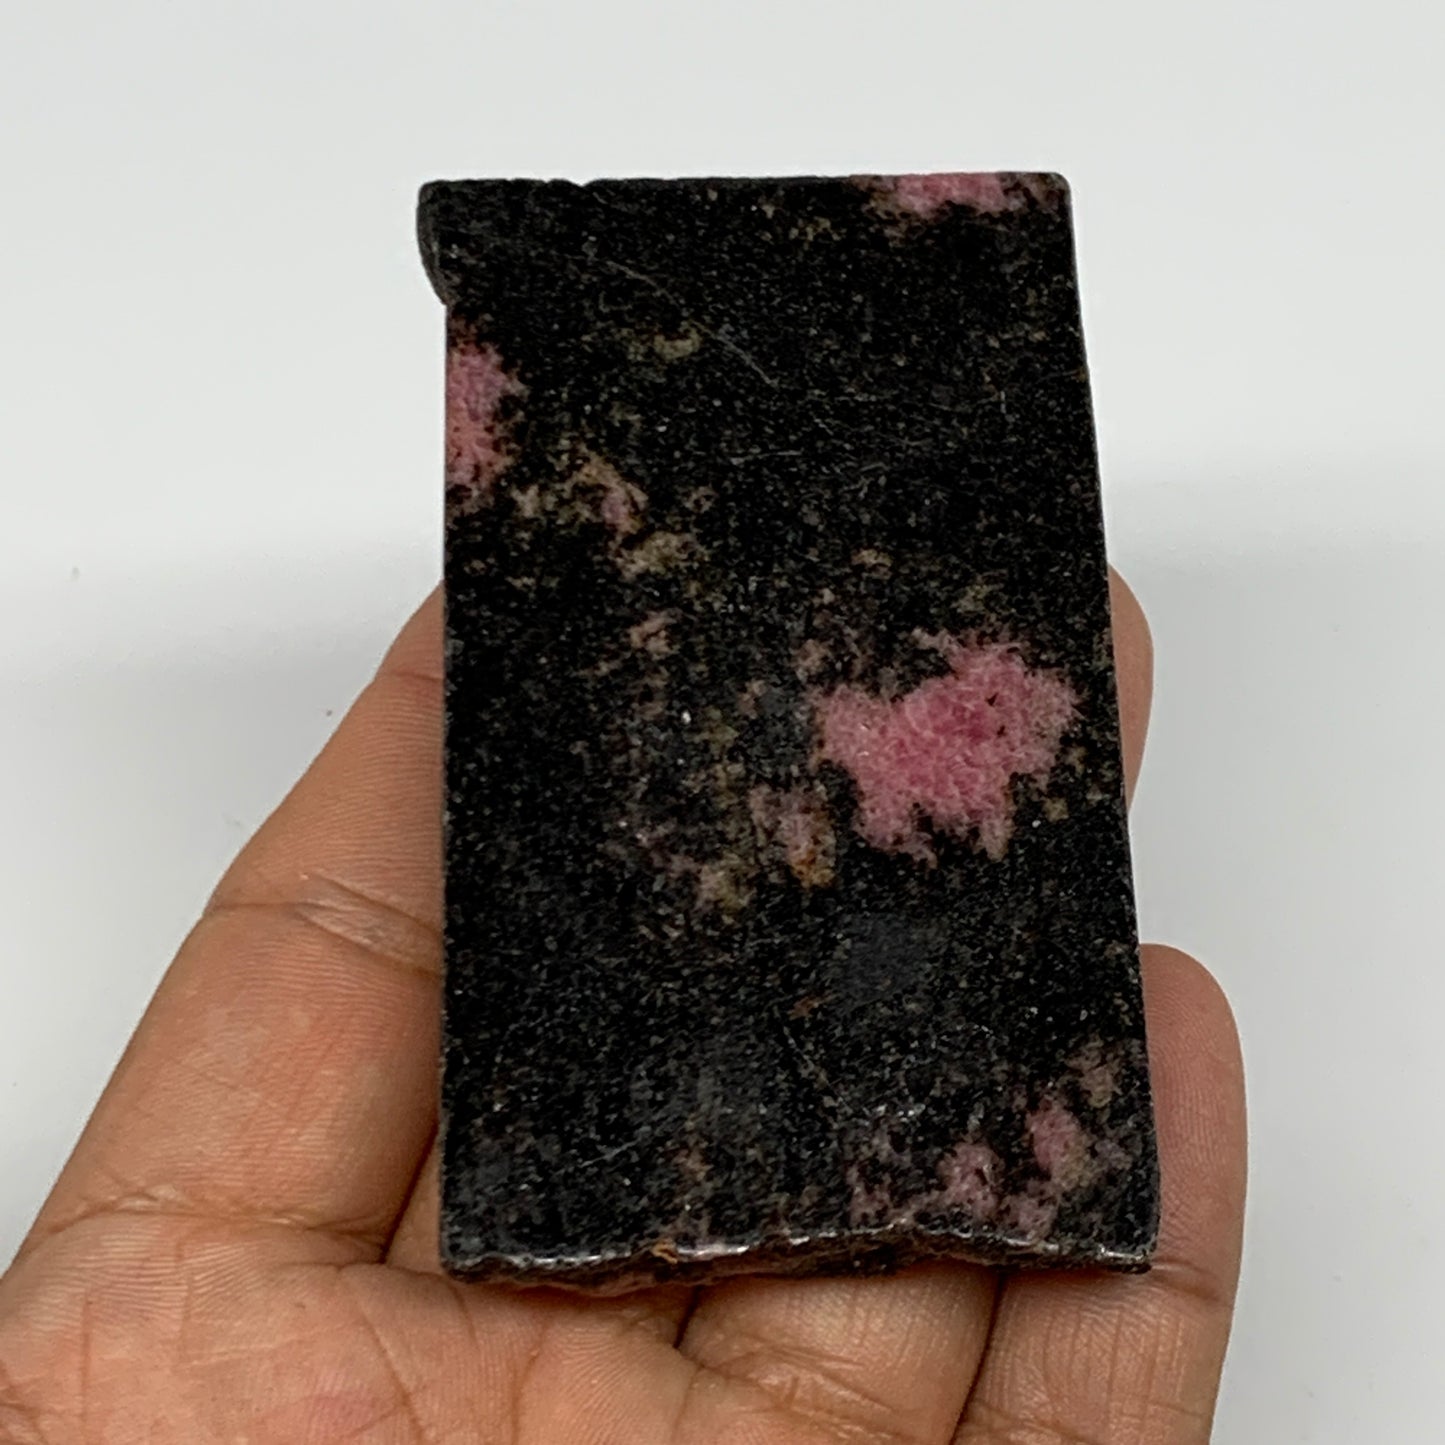 109.7g, 3"x1.7"x0.4", One face polished Rhodonite, One face semi polished, B1600